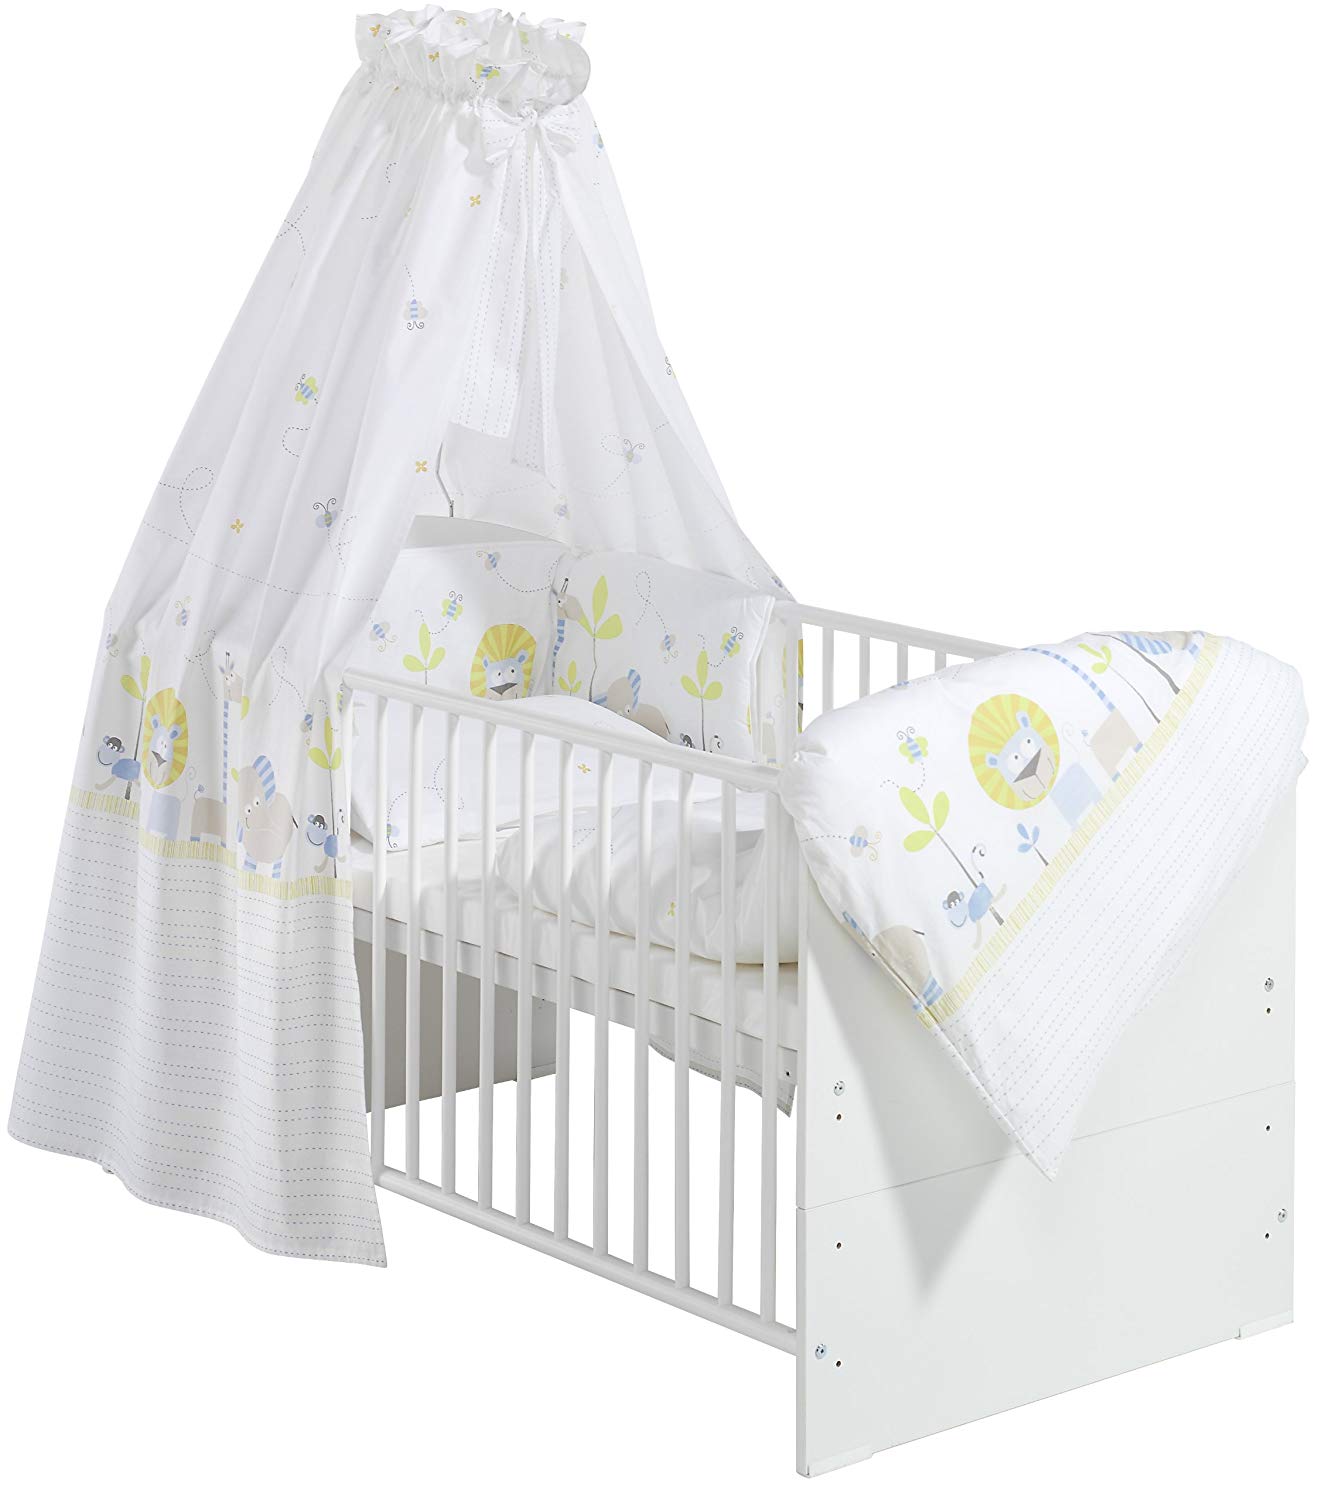 Schardt Classic Complete Bed Cot 4-Piece Set Bed Set, Canopy Pole and Mattr